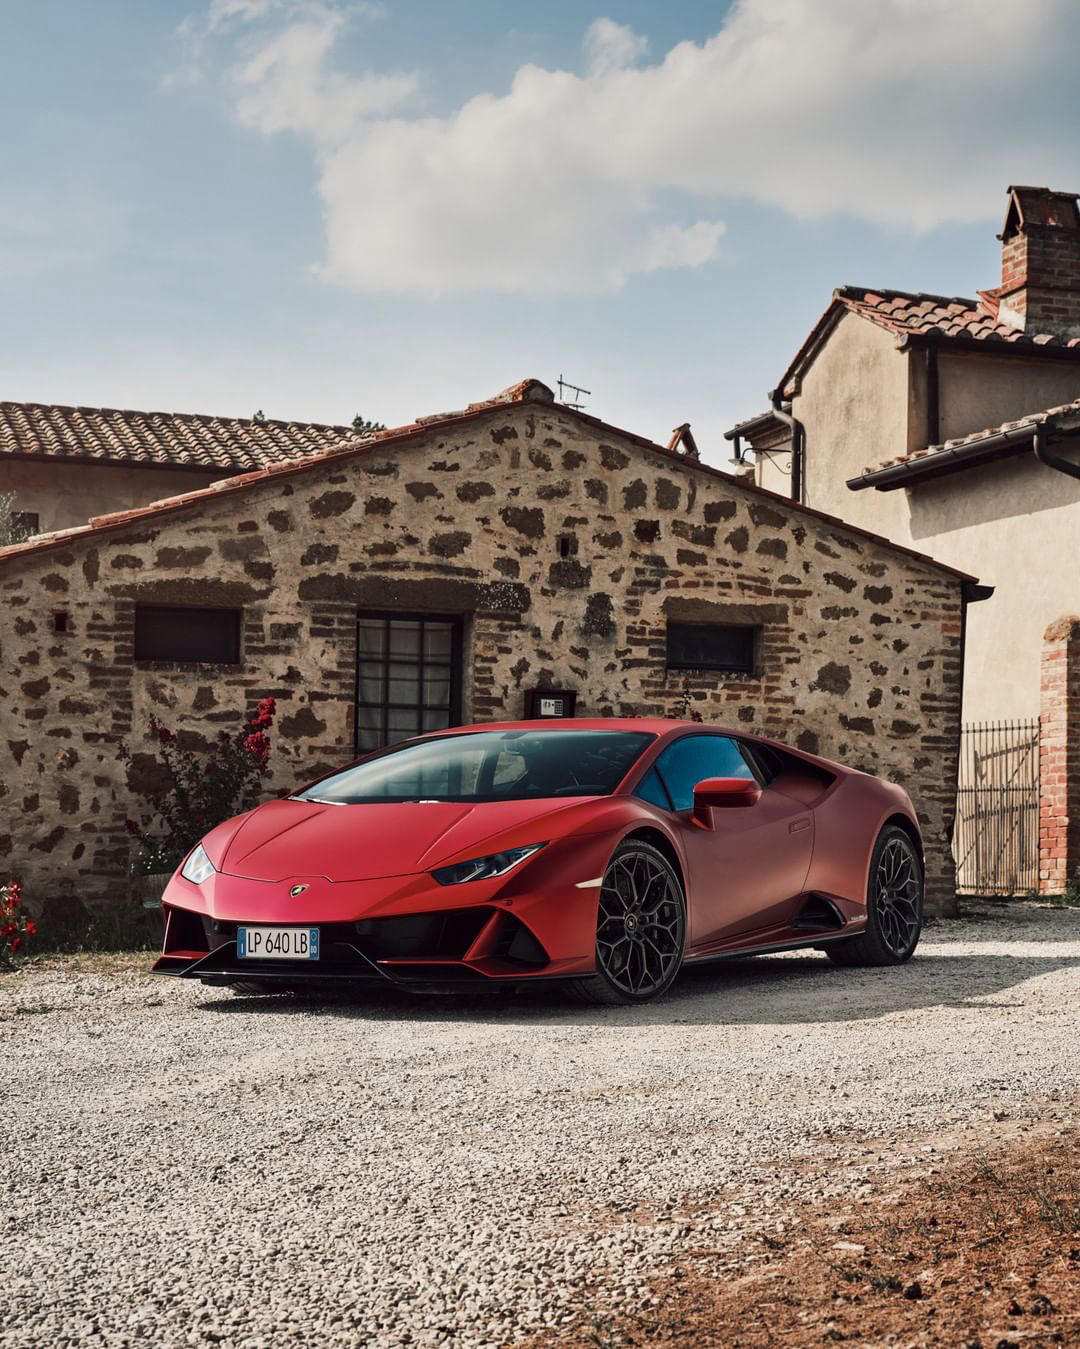 Lamborghini - We have a long-lasting tradition of creating vehicles that make you dream